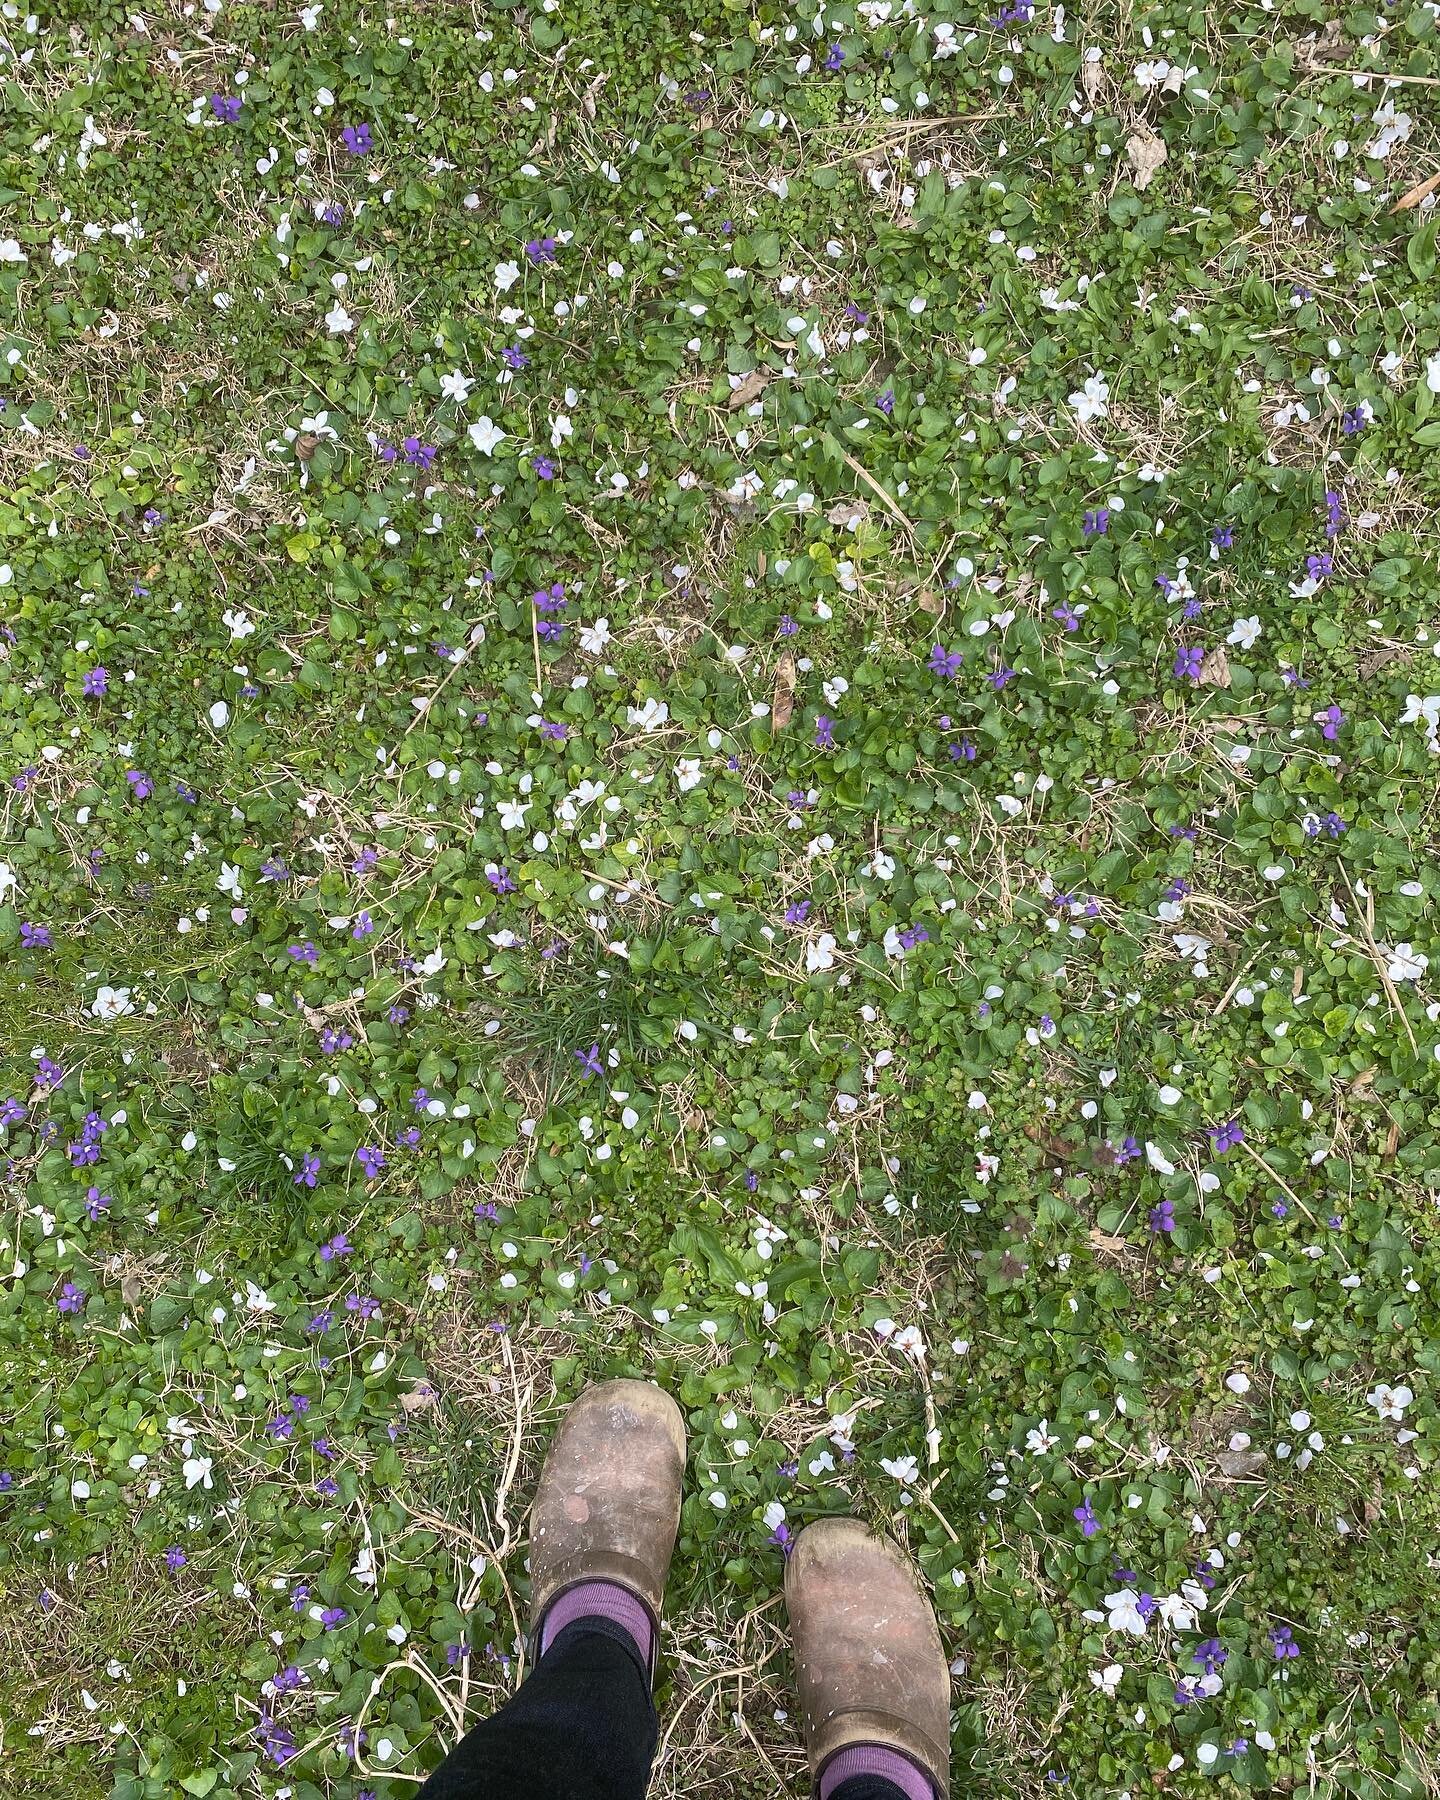 Wild violets and cherry blossom petals cover my lawn in sweet smelling confetti. One beautiful part of nature&rsquo;s springtime parade. 

#nature #naturelovers #dansko #confetti #greenandpurple #cherryblossom #inspiration